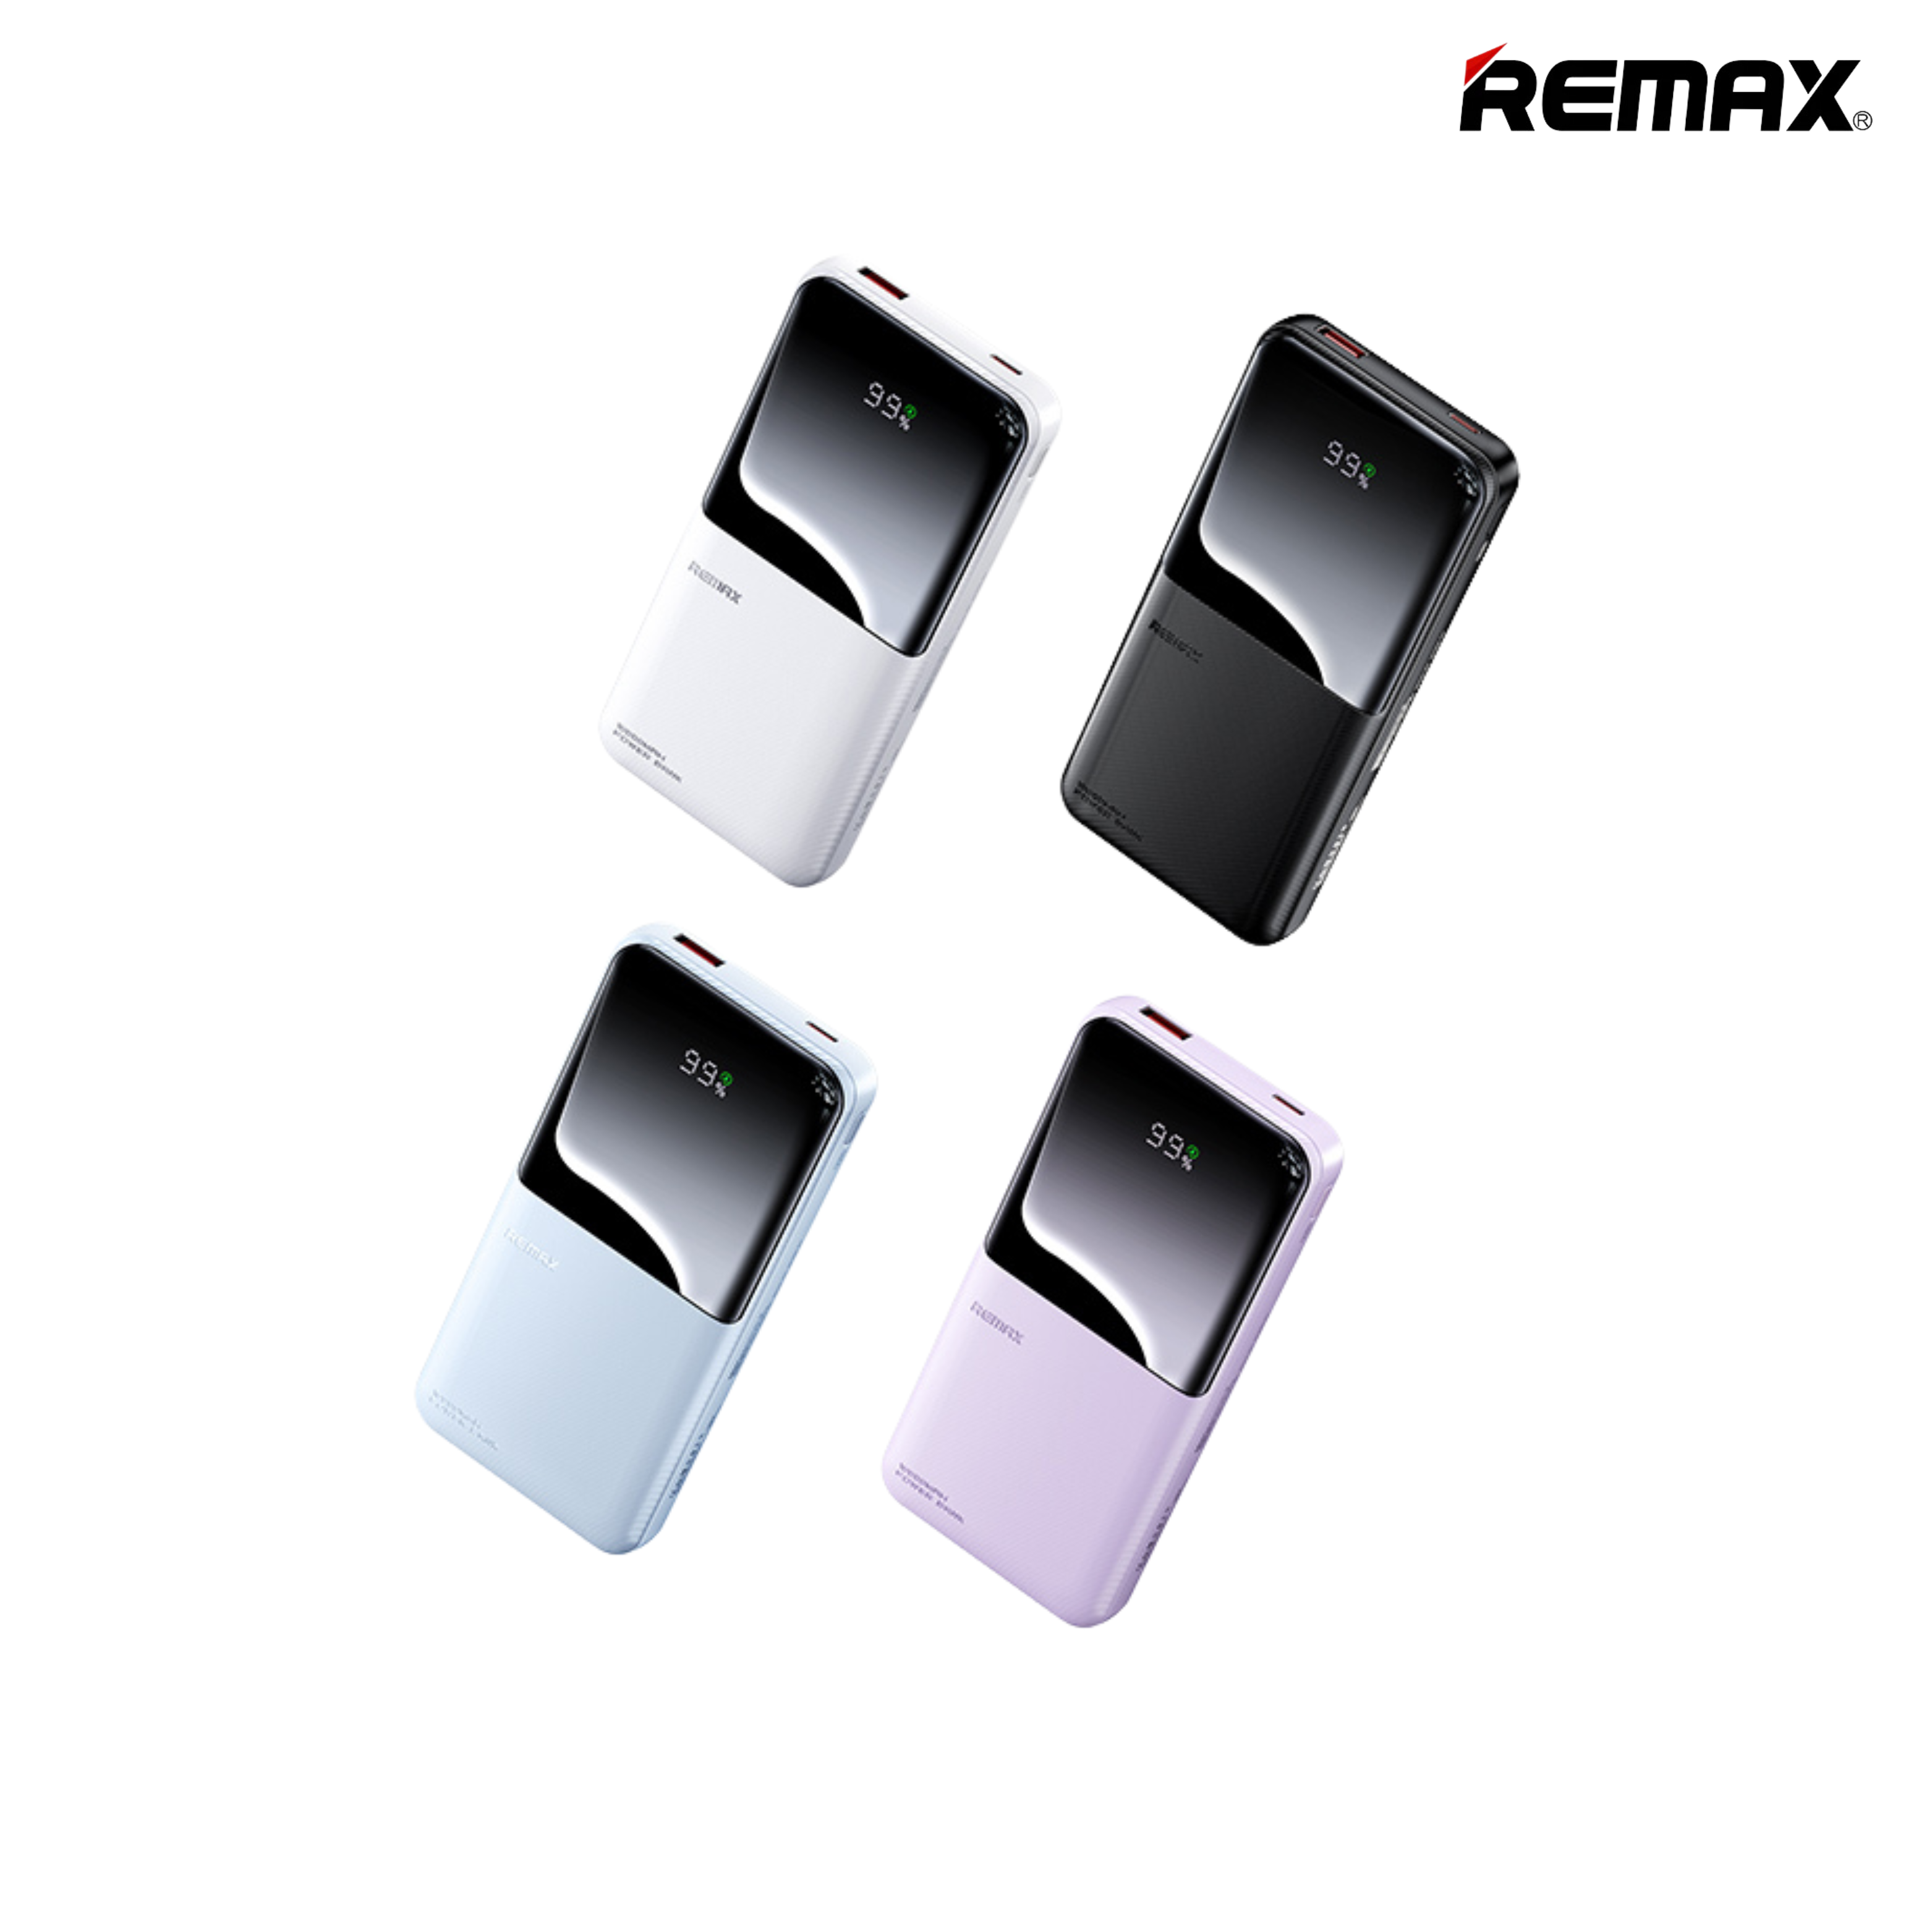 REMAX RPP-679 10000MAH CYNLLE SERIES 20W+22.5W POWER BANK WITH 2 FAST CHARGING CABLE(Black)